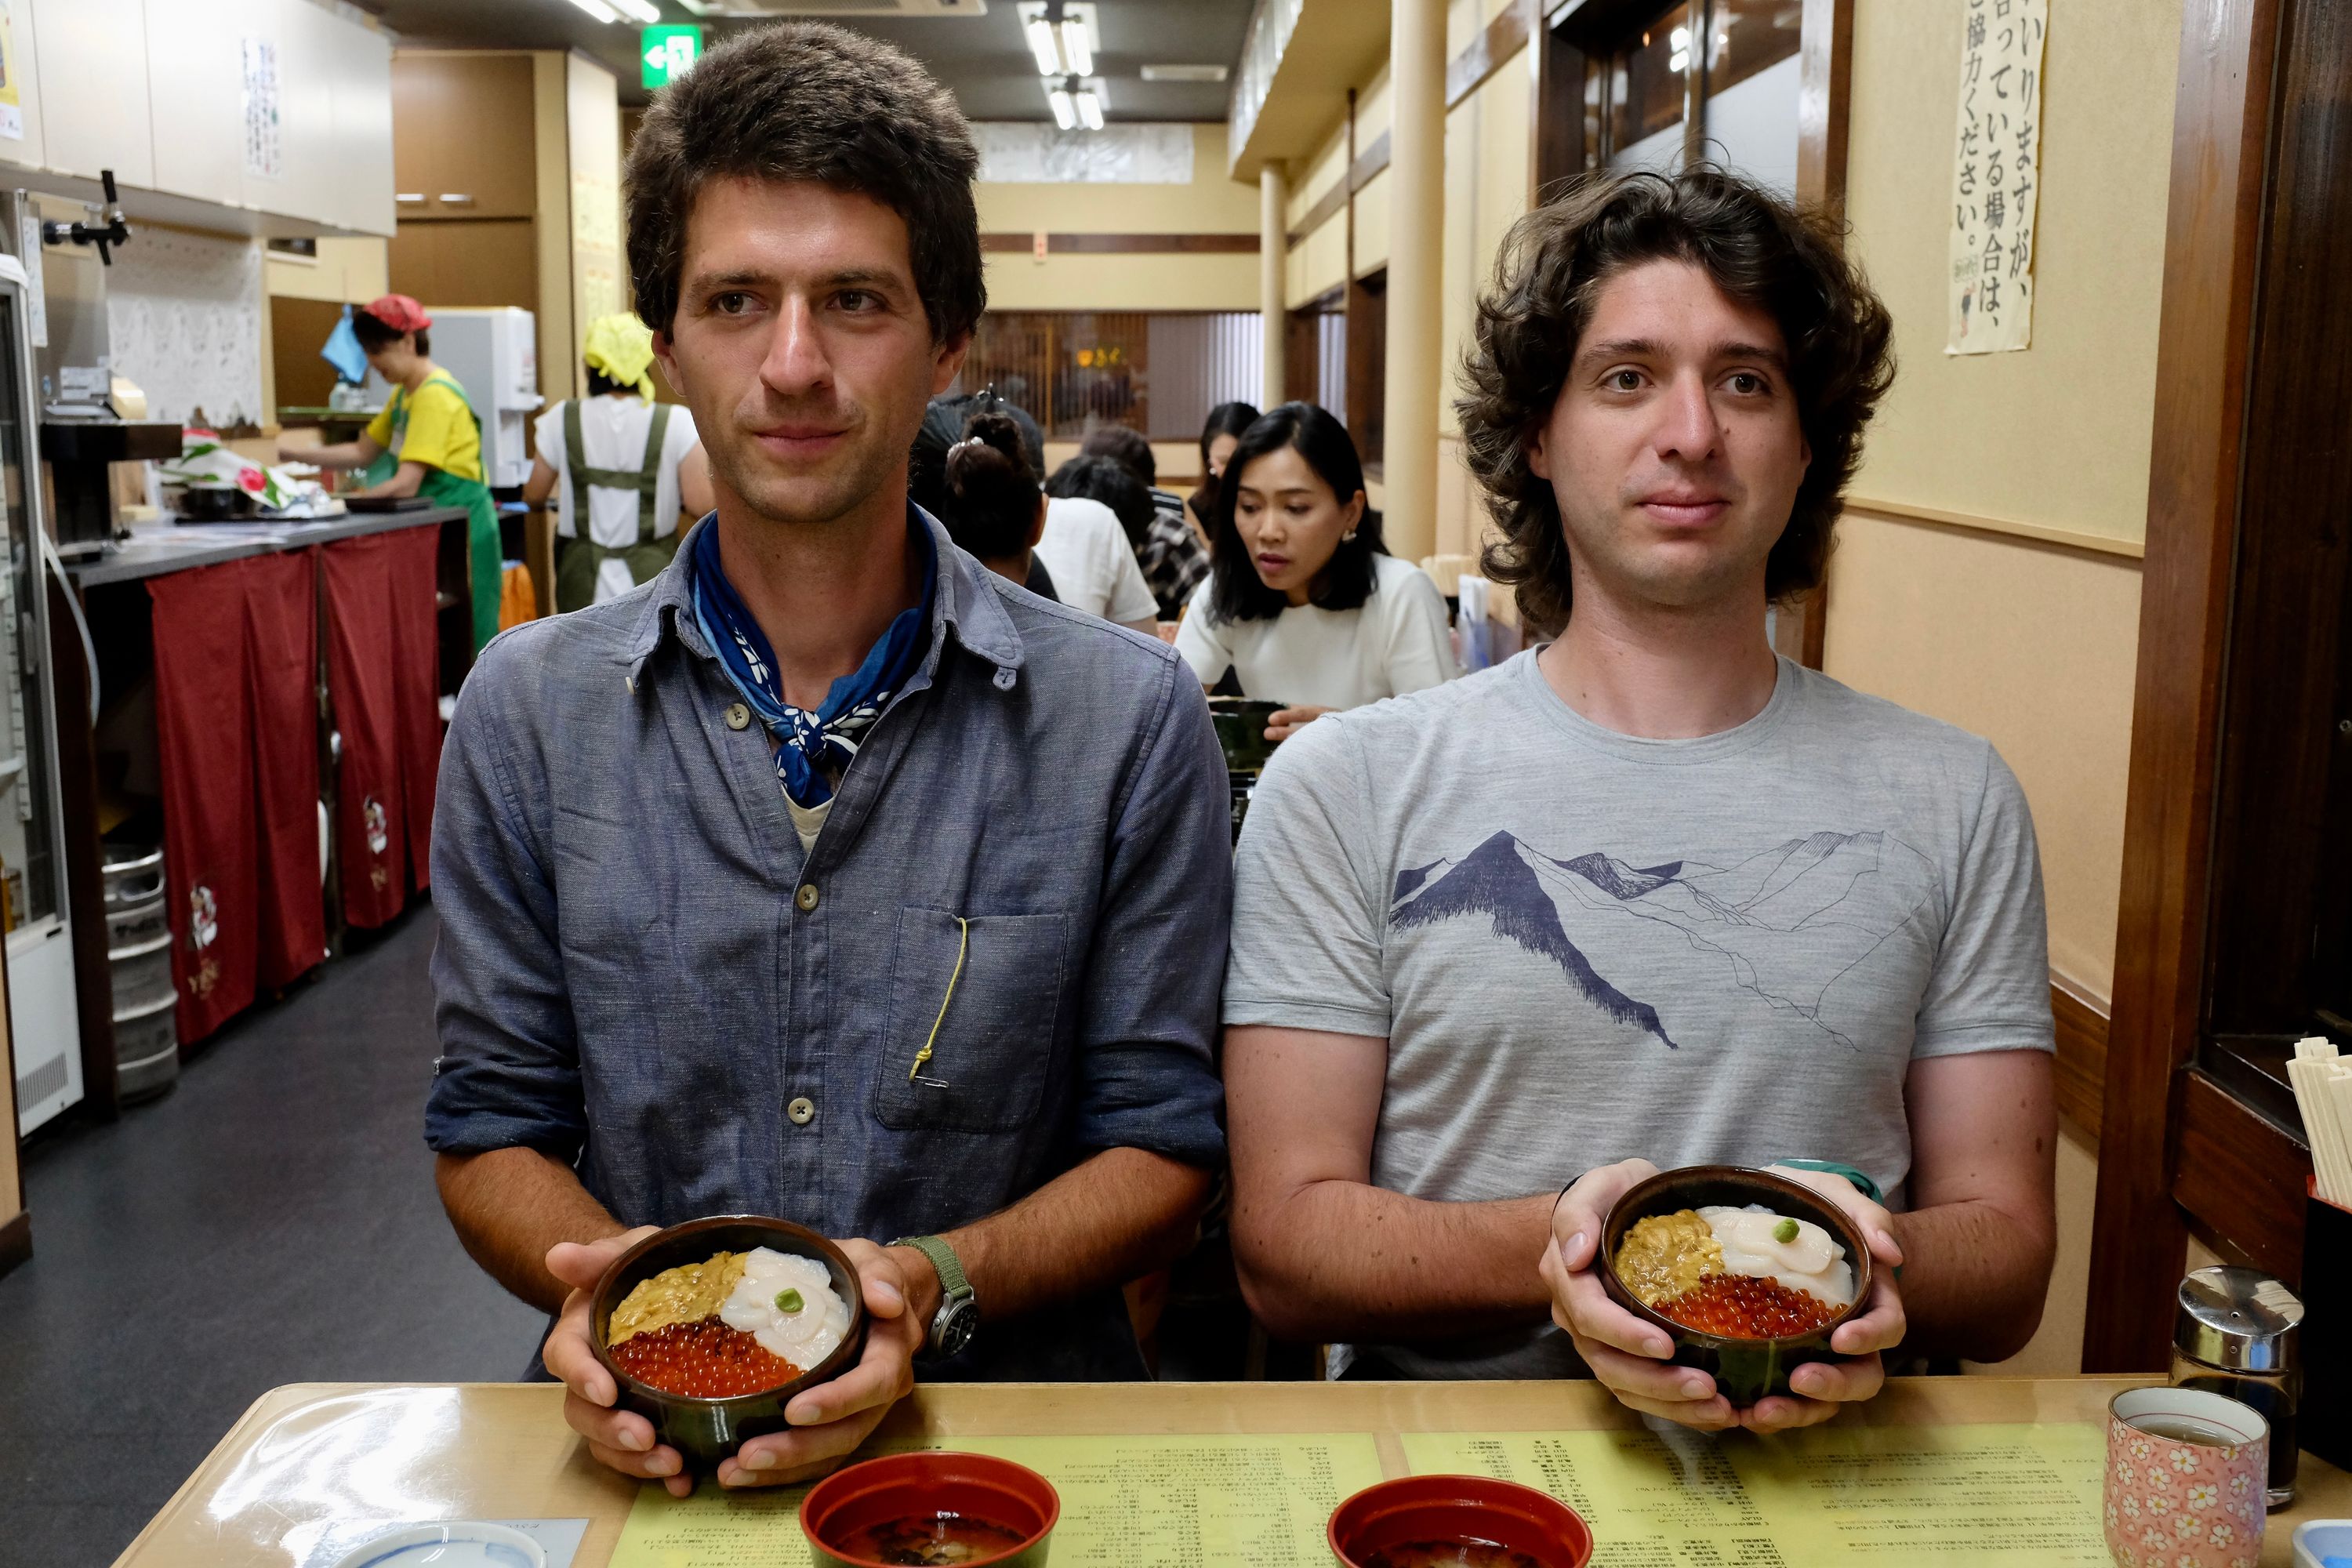 The author and Gabor pose with two bowls of seafood in a restaurant.